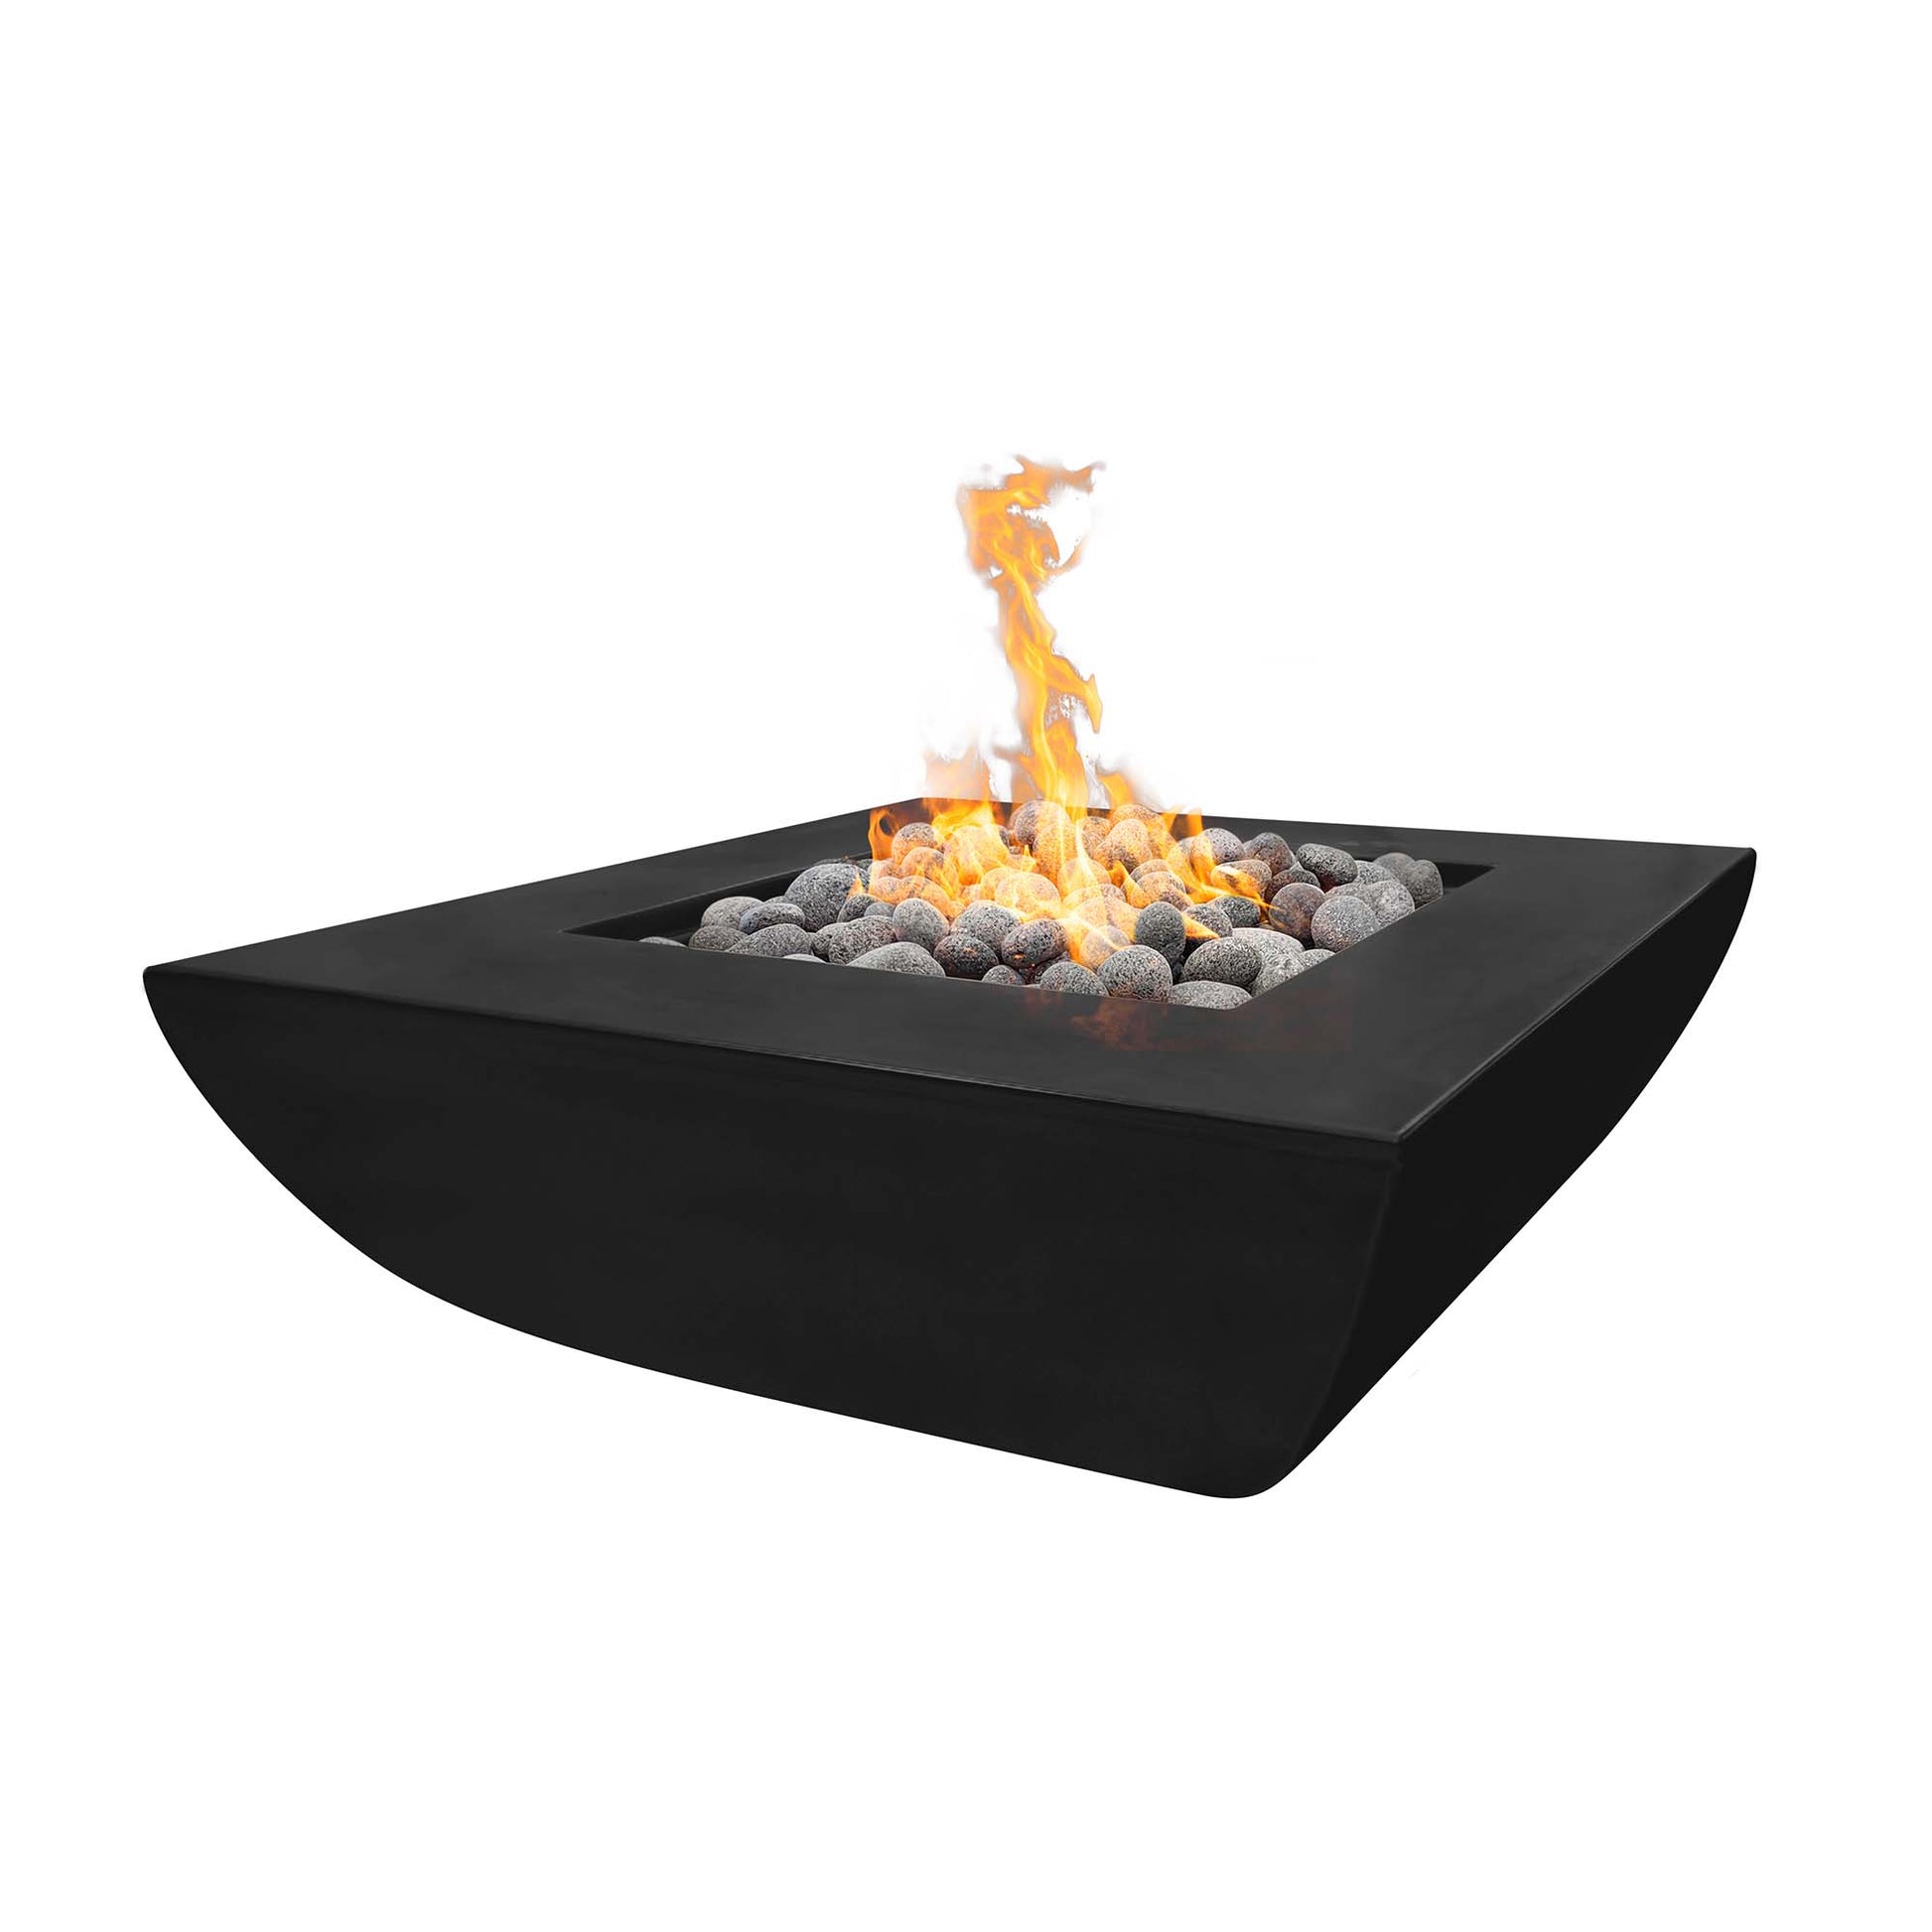 The Outdoor Plus Square Avalon 42" Metallic Silver GFRC Concrete Natural Gas Fire Pit with Match Lit with Flame Sense Ignition